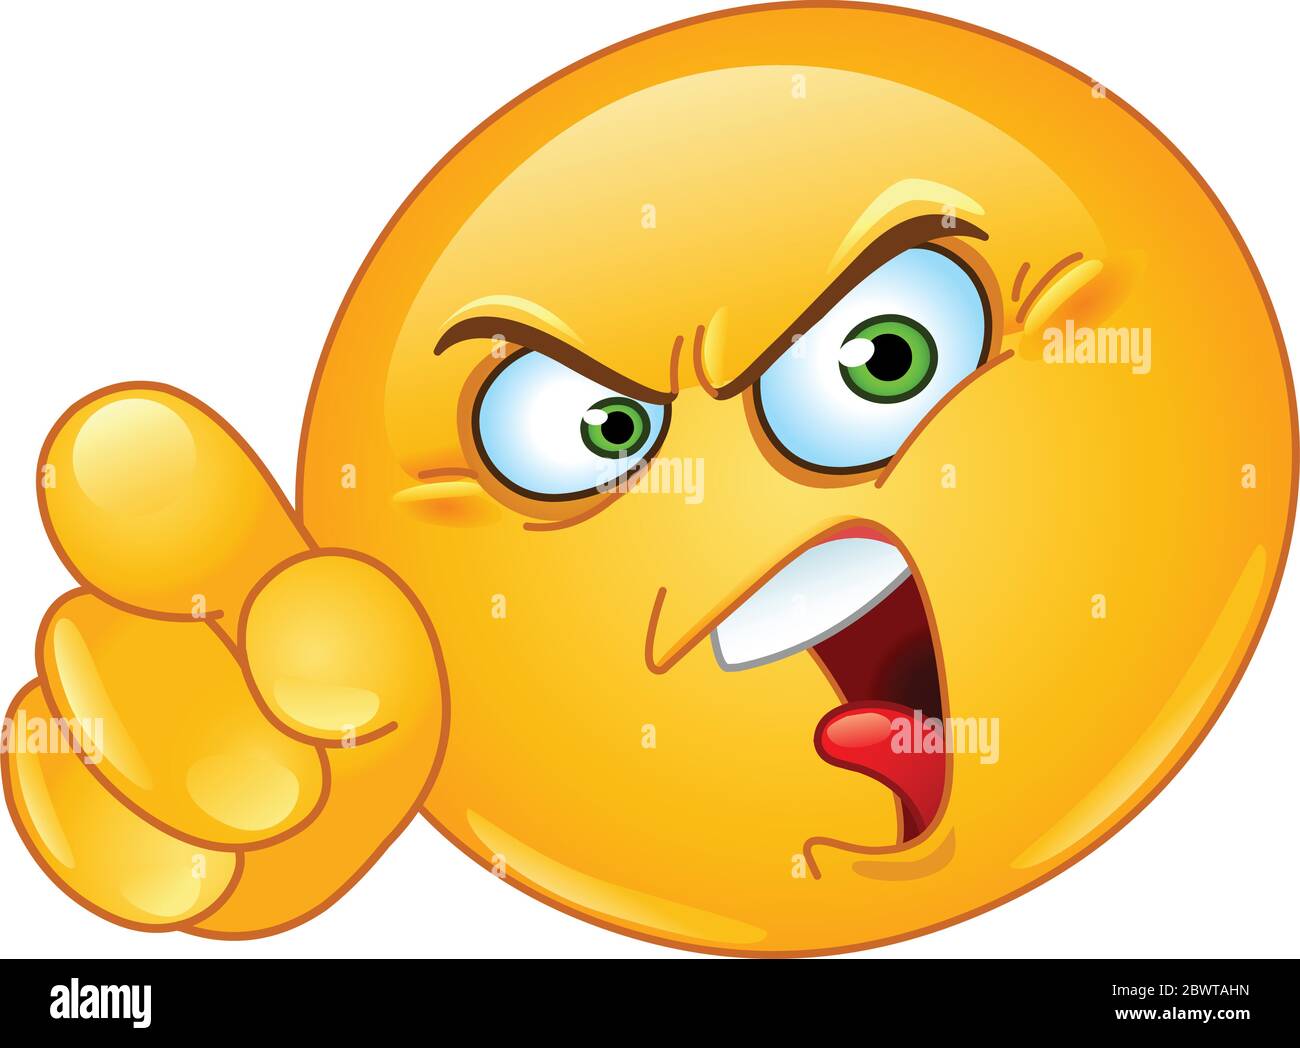 Angry emoticon pointing an accusing finger Stock Vector